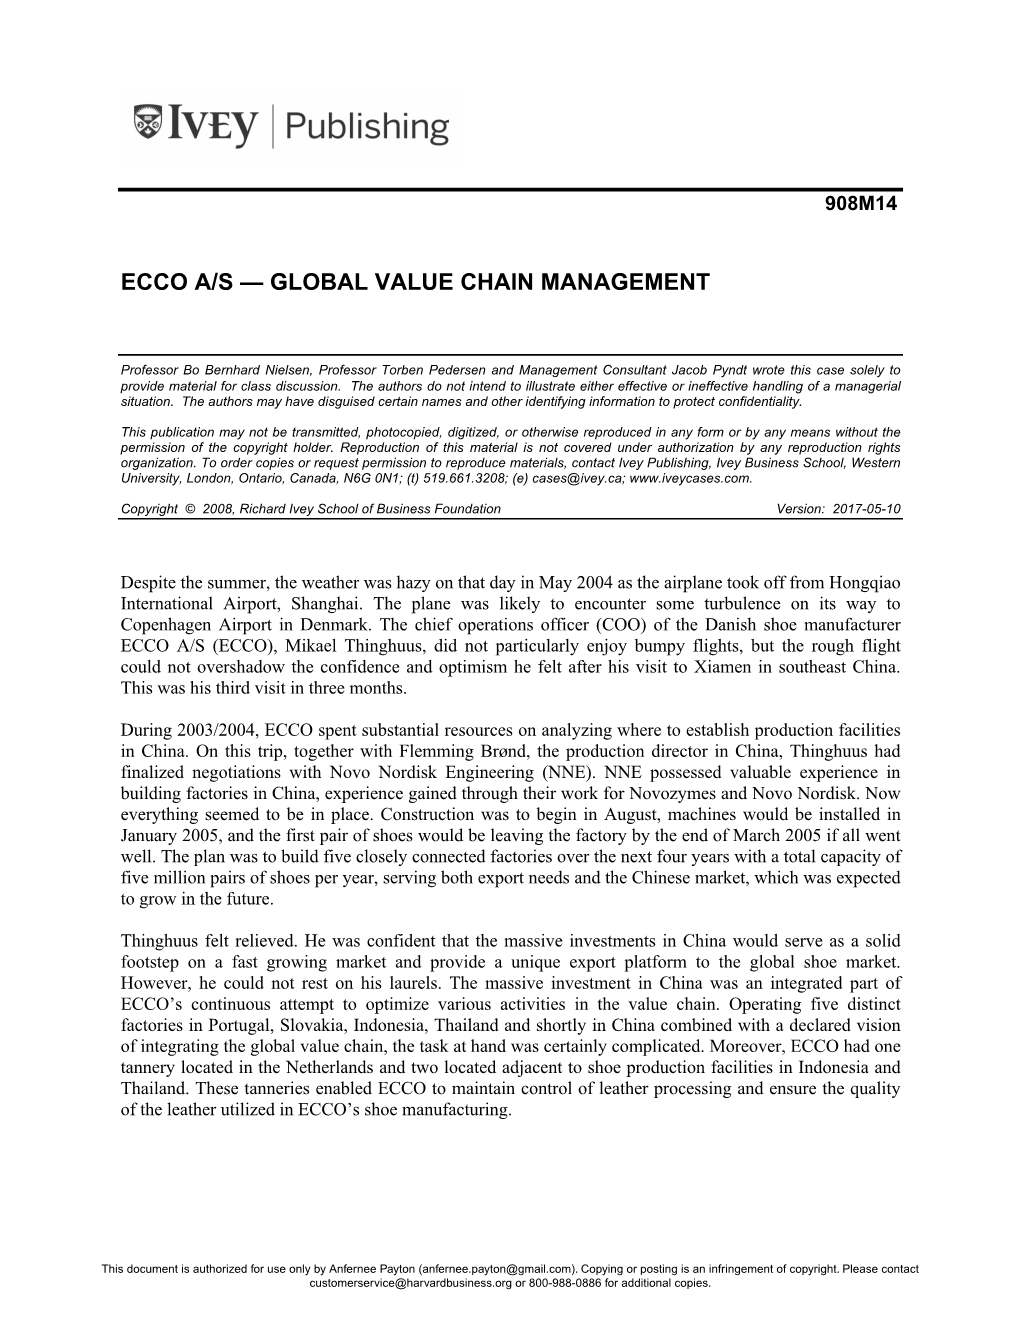 Ecco A/S — Global Value Chain Management